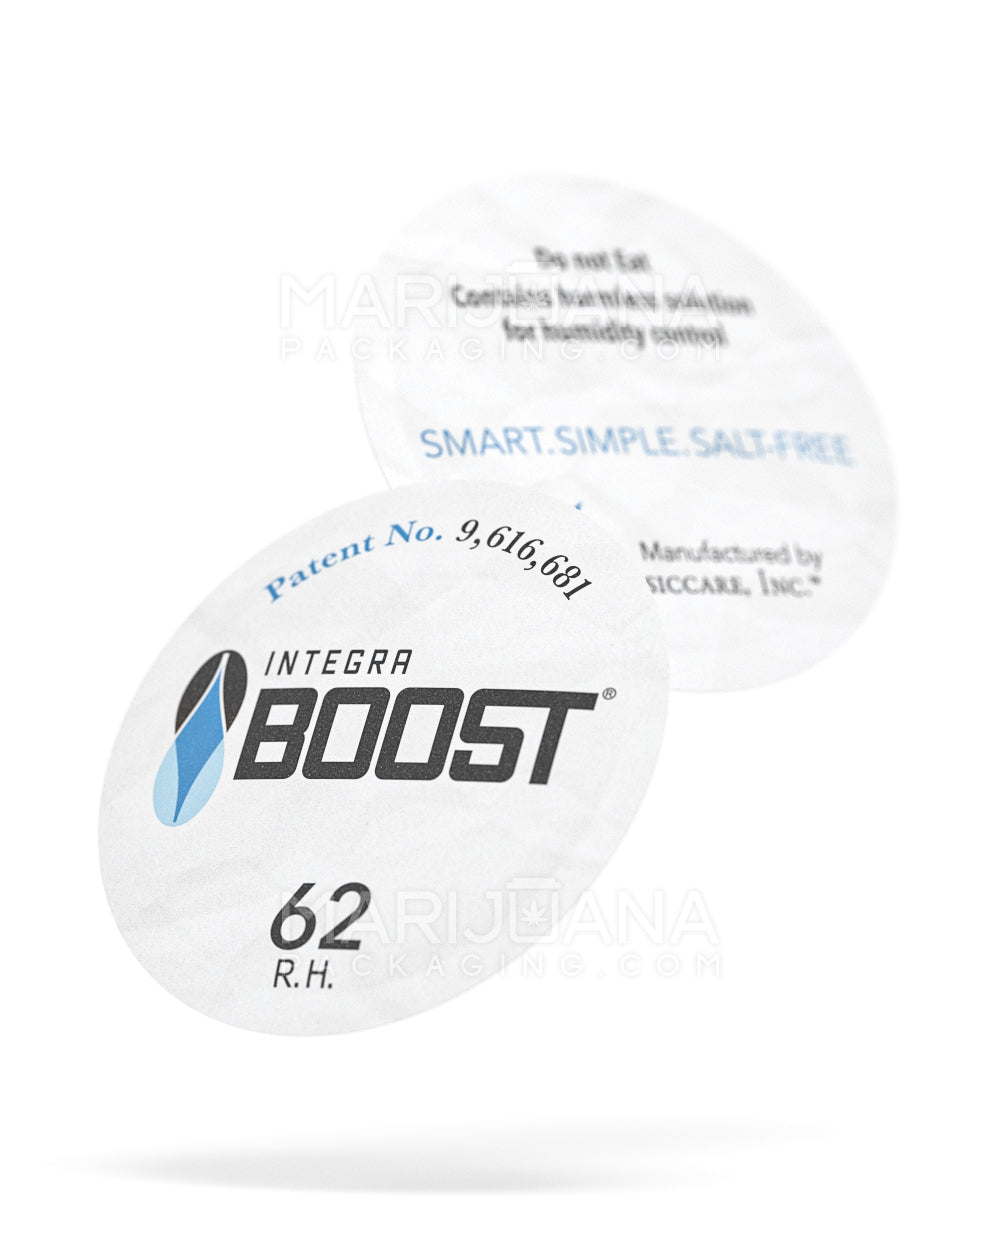 INTEGRA | Boost Humidity Pack | 50mm - 62% - 100 Count - 7